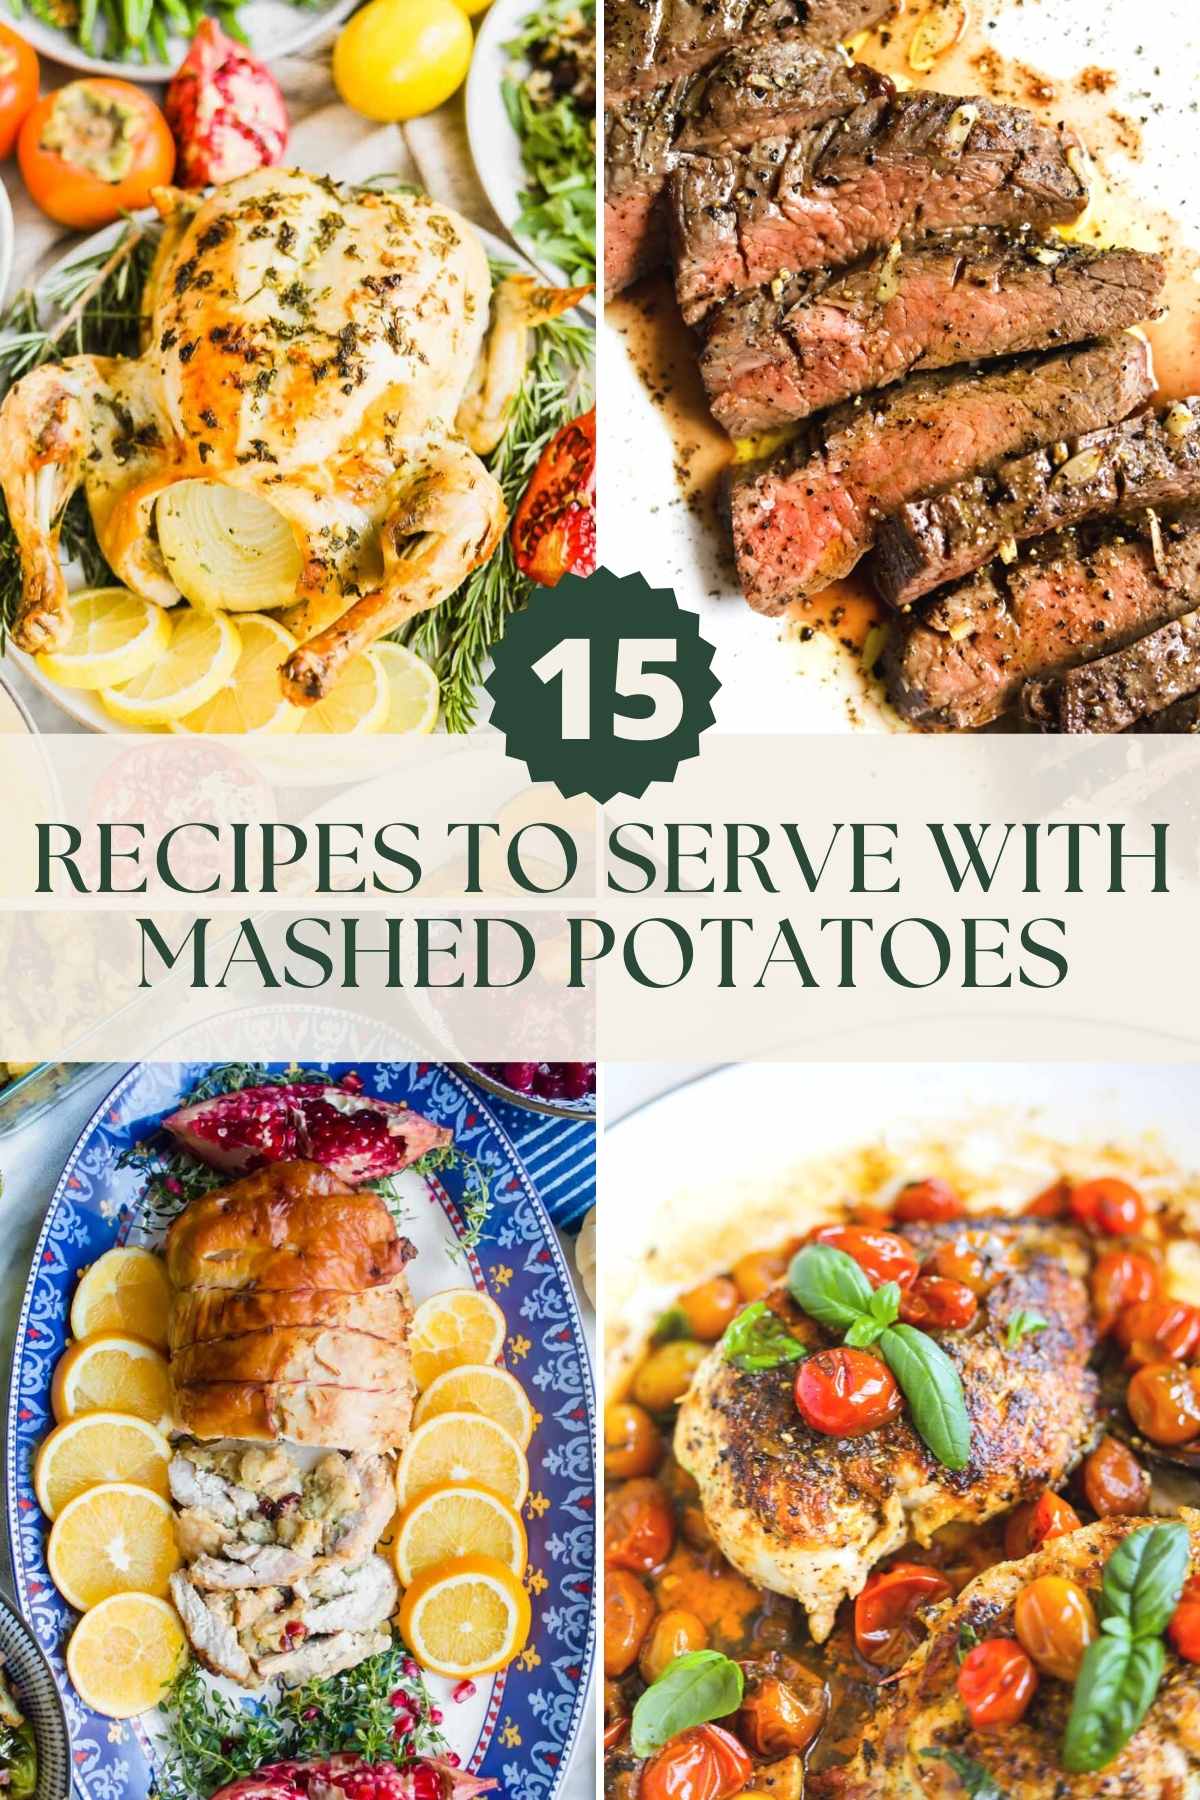 15 recipes to serve with mashed potatoes, including chicken, steak, turkey roulade, and fish.